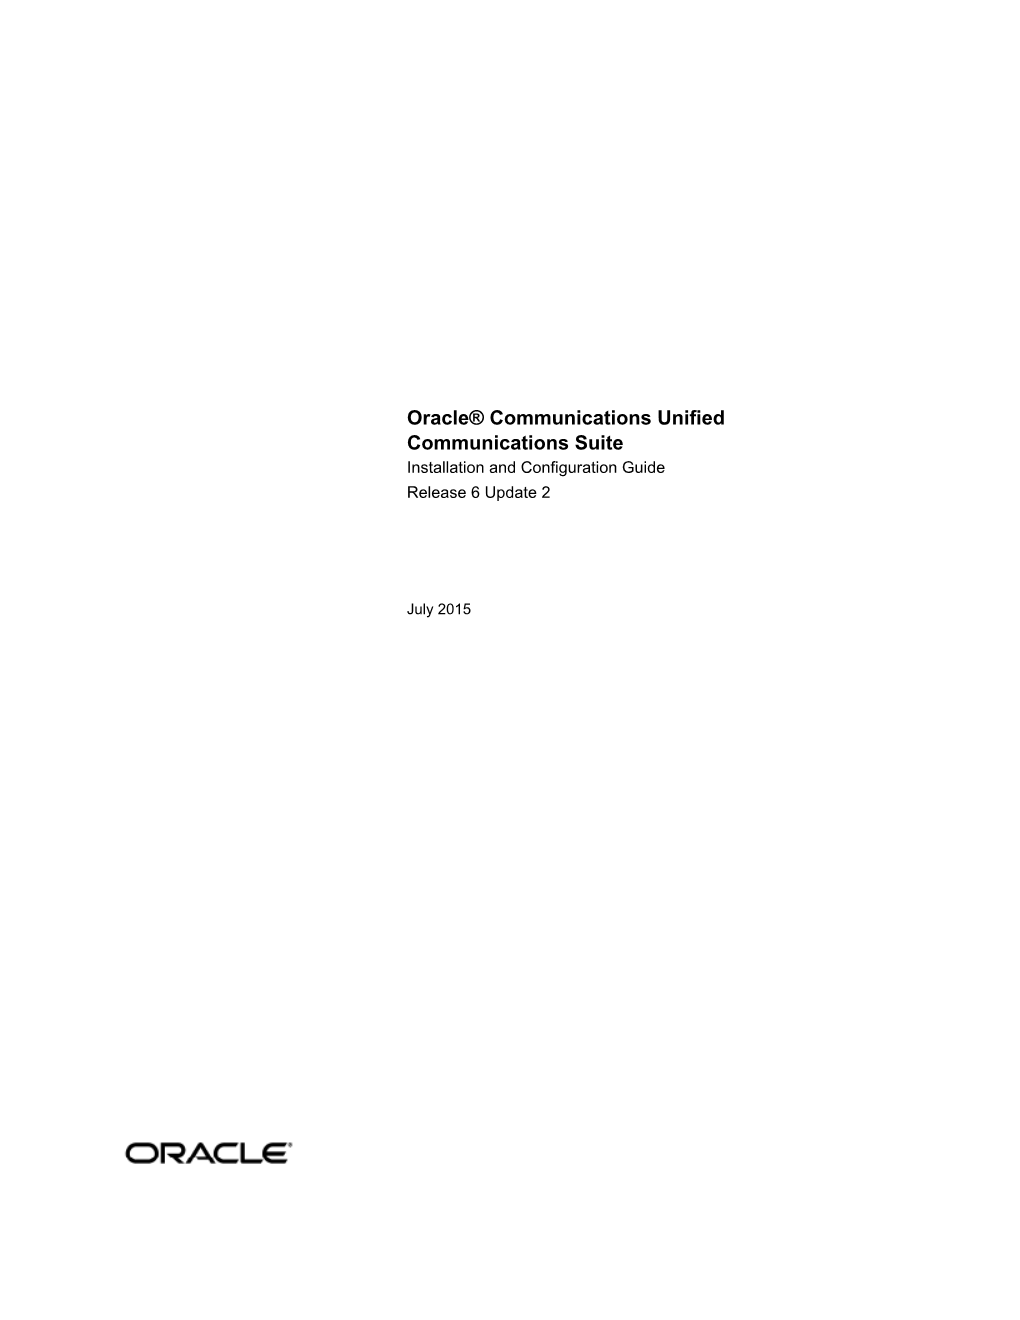 Oracle Communications Unified Communications Suite Installation and Configuration Guide, Release 6 Update 2